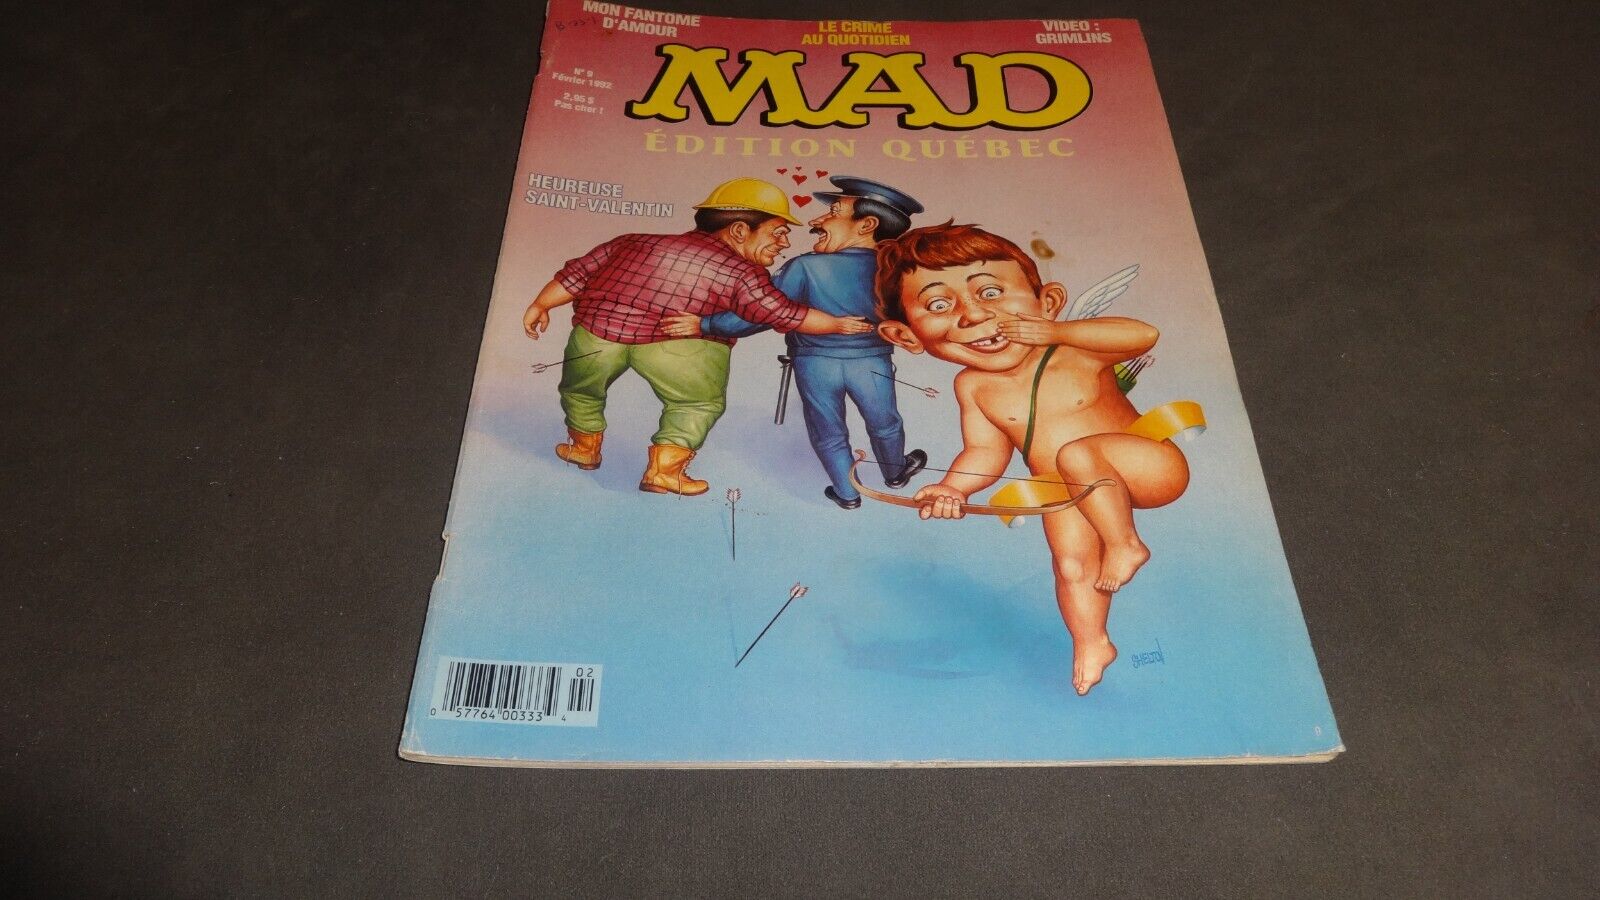 MAD Magazine First Premiere #9 Issue Fevrier 1992 RARE French Canadian / Quebec